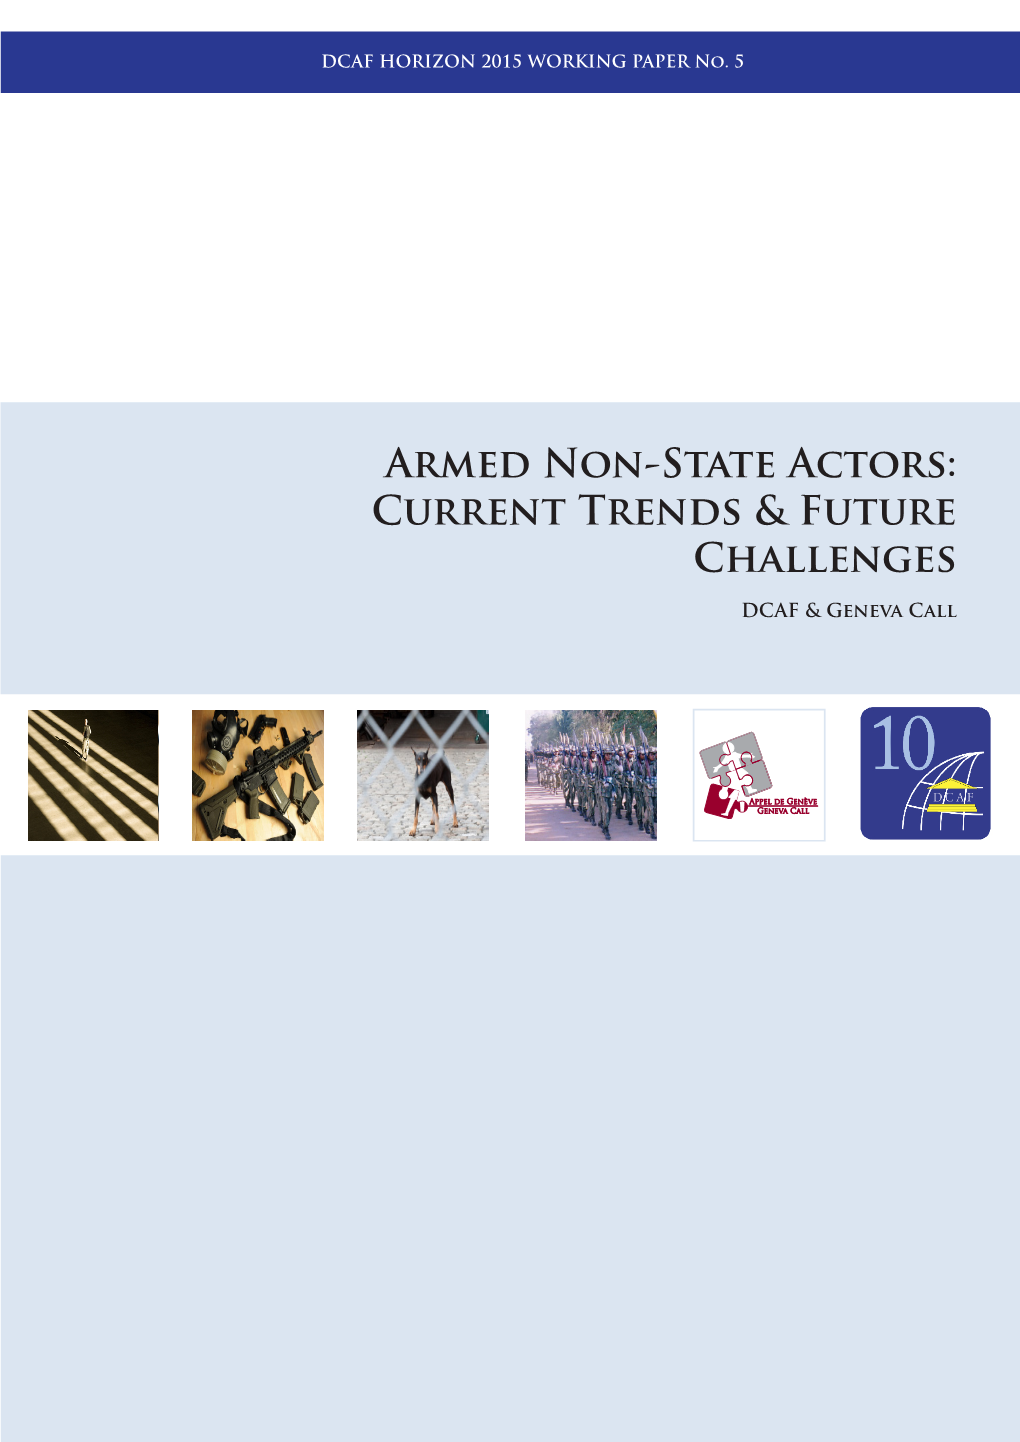 Armed Non-State Actors: Current Trends & Future Challenges